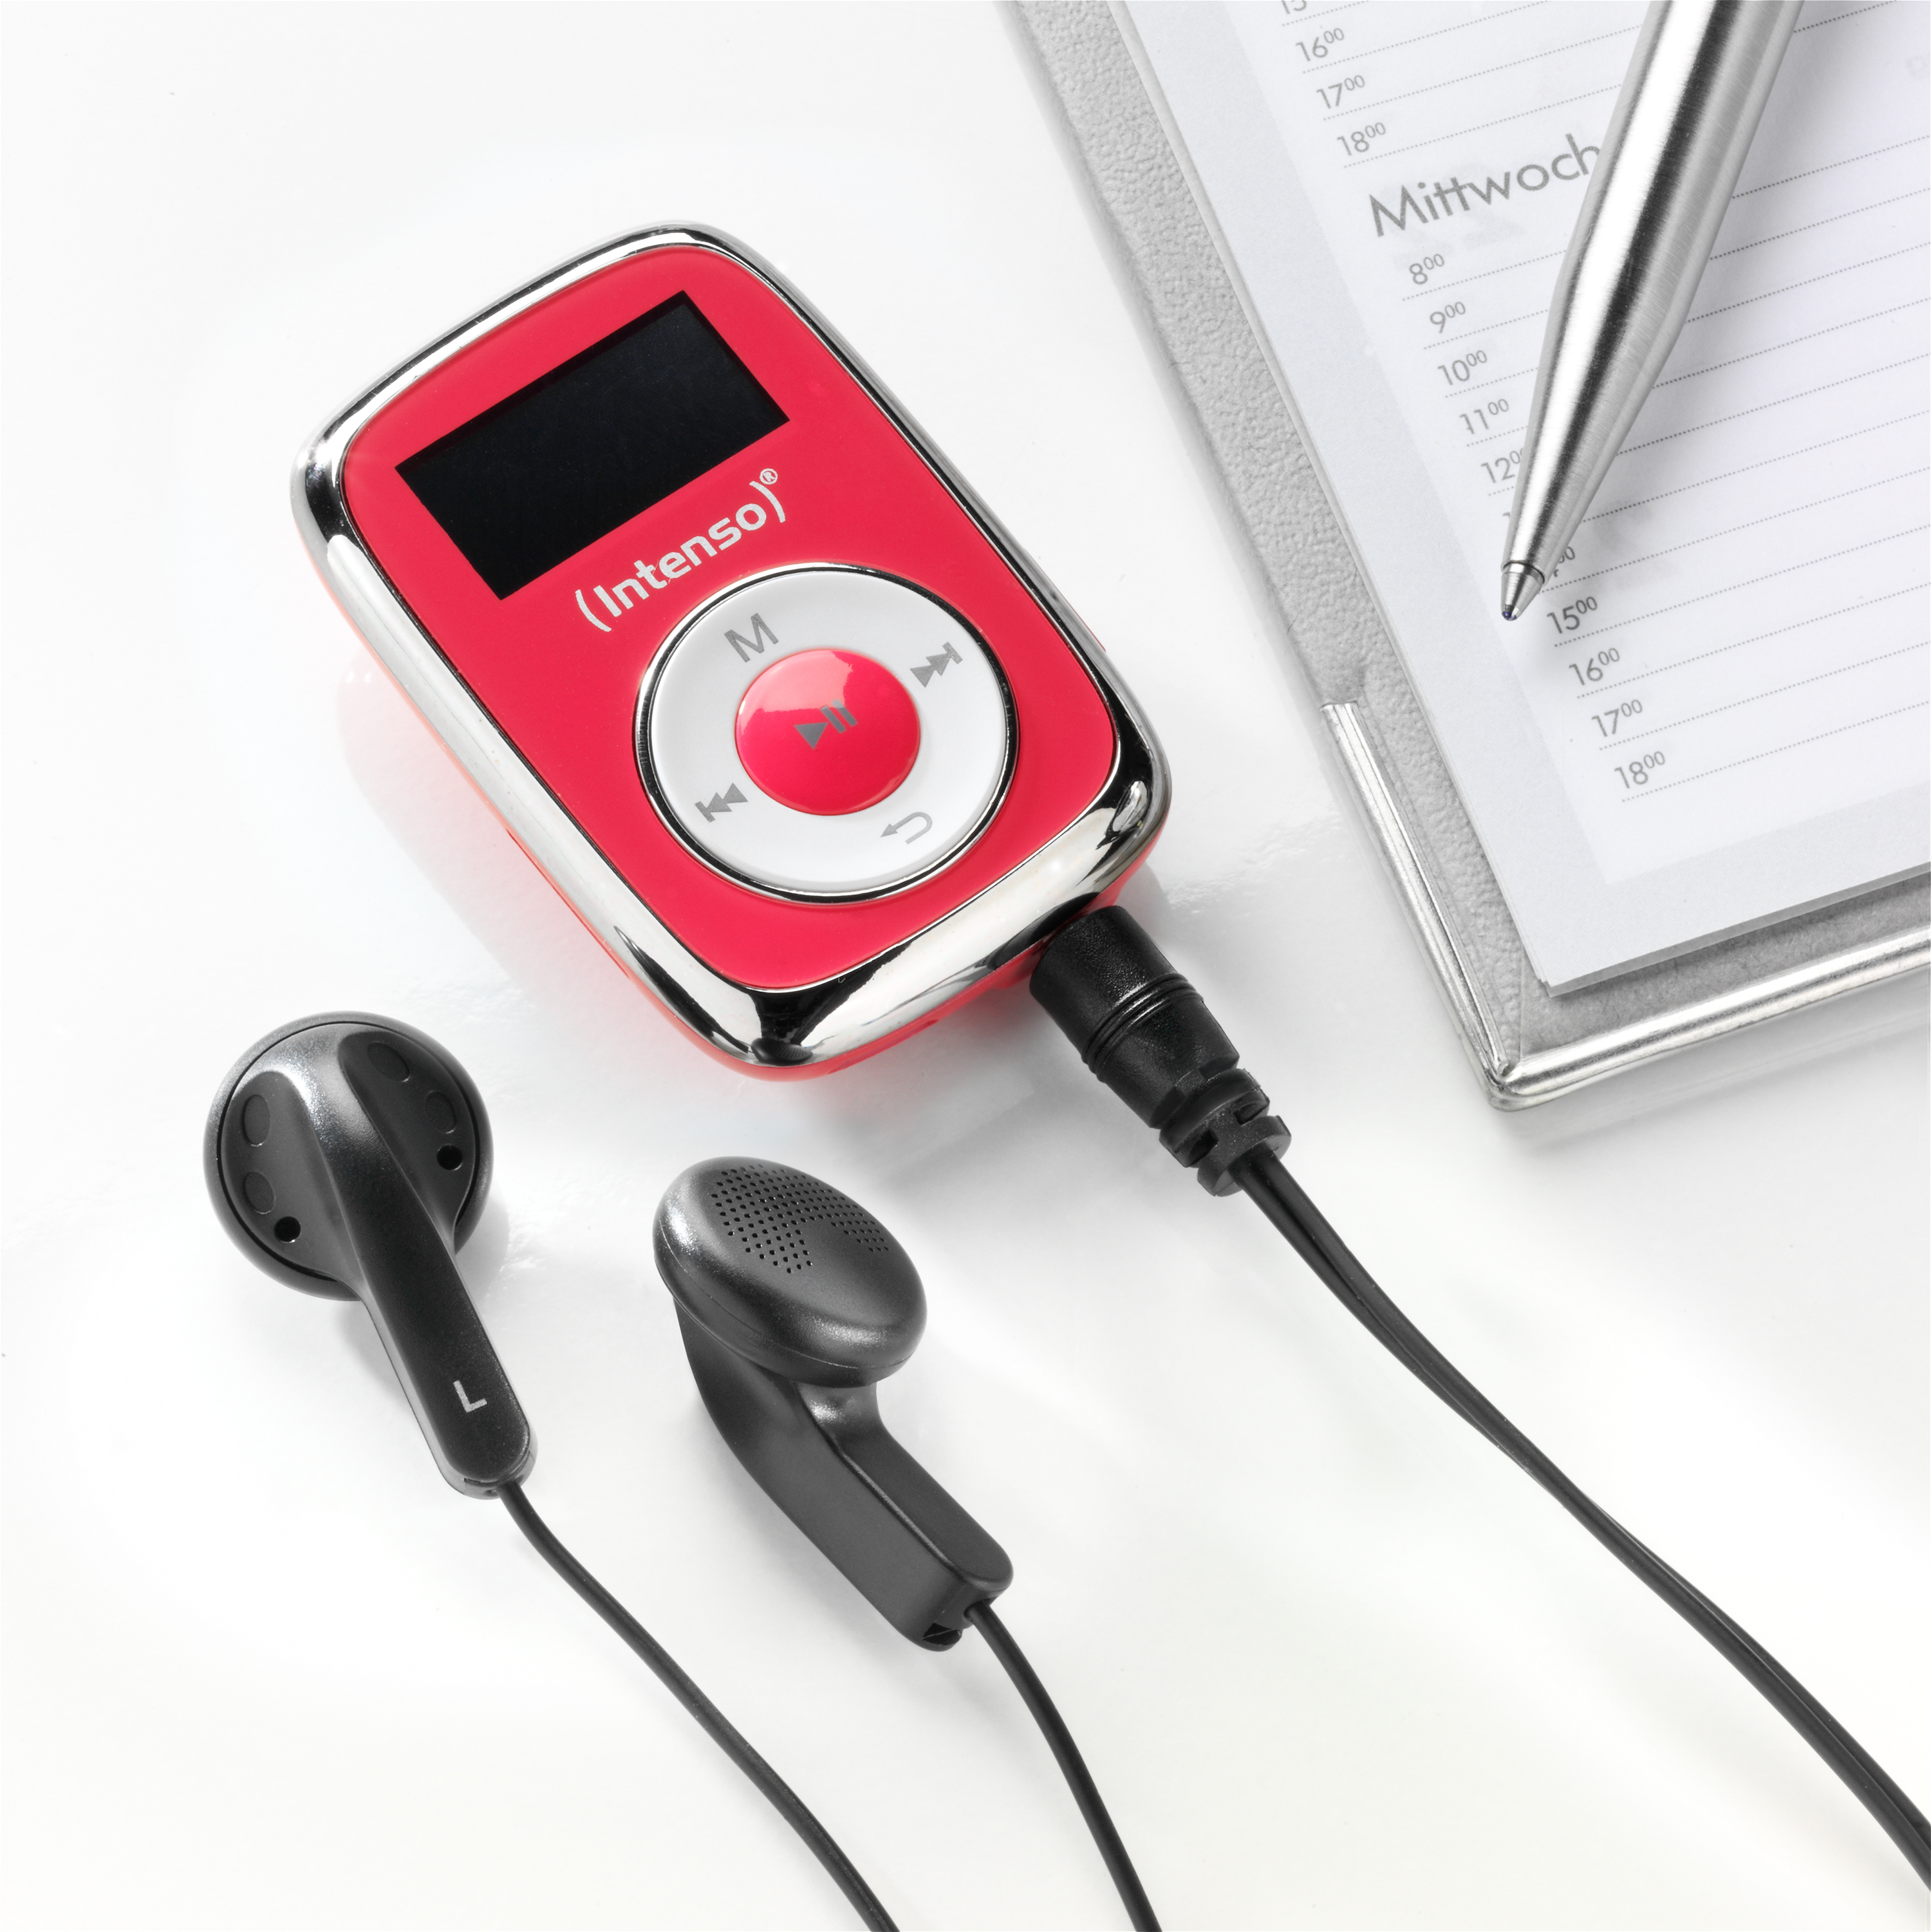 INTENSO Music Mover Pink) (8 GB, Mp3-Player